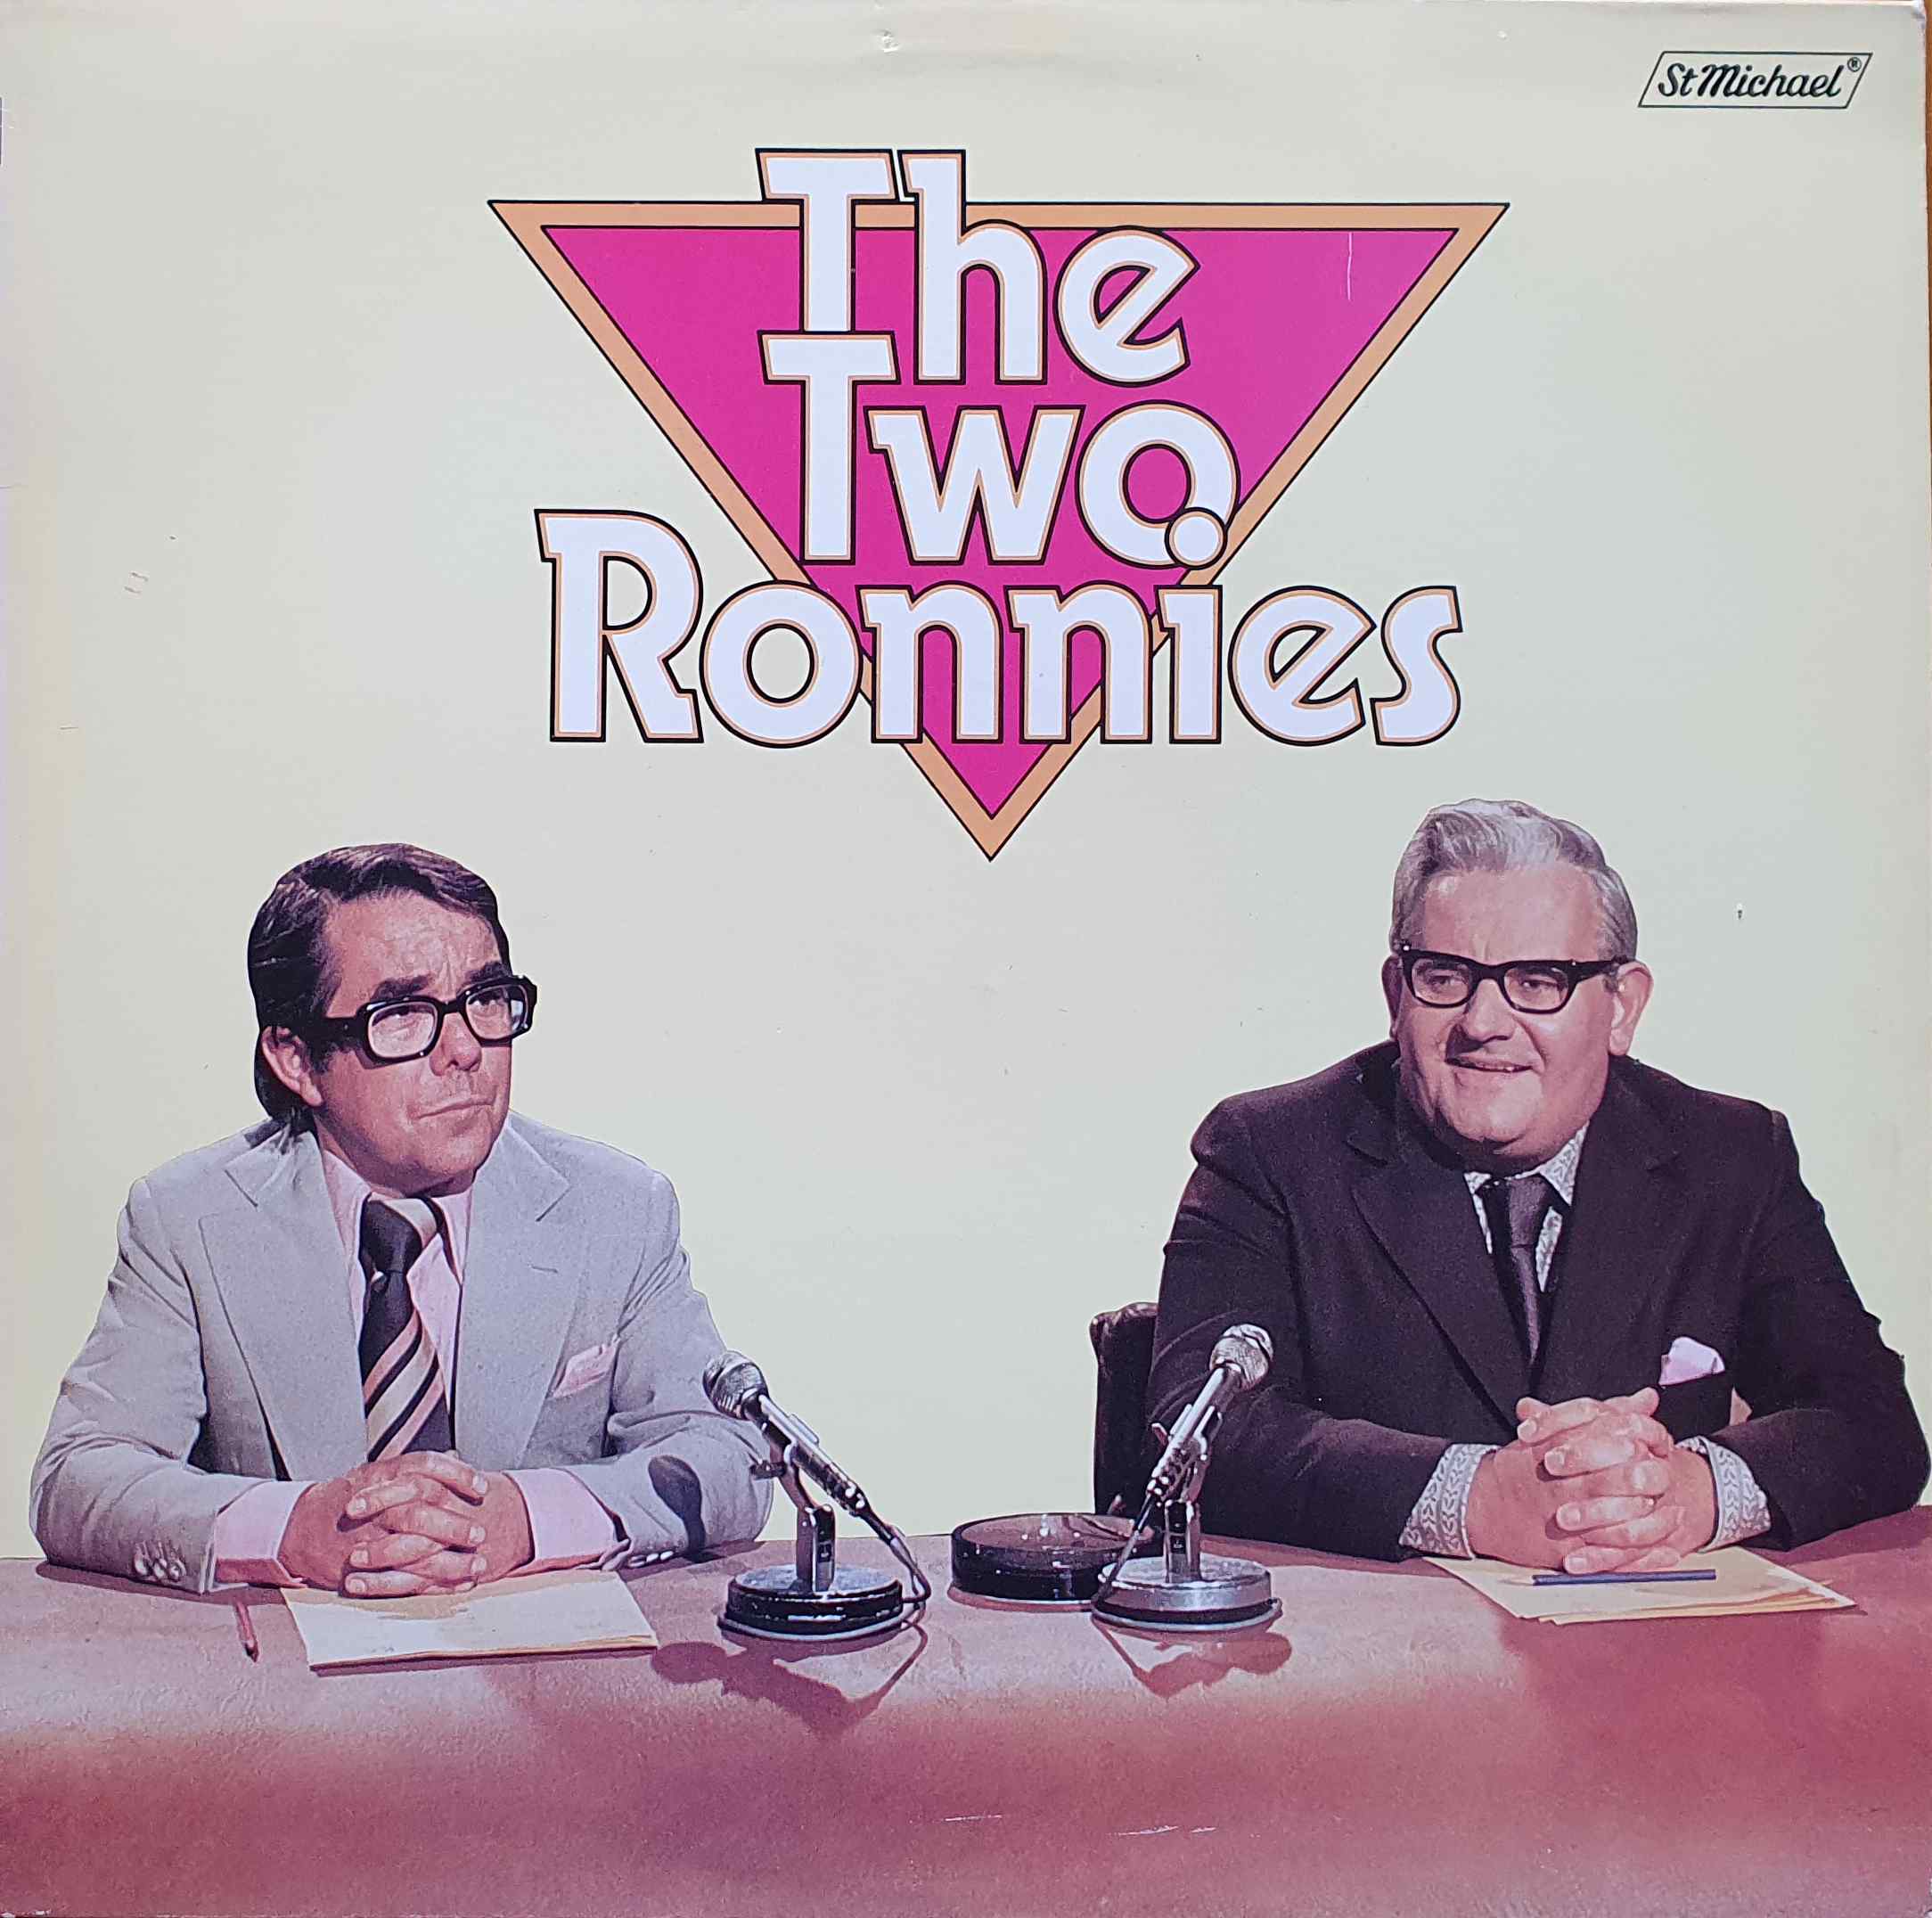 Picture of The two Ronnies by artist Ronnie Barker / Ronnie Corbett from the BBC albums - Records and Tapes library